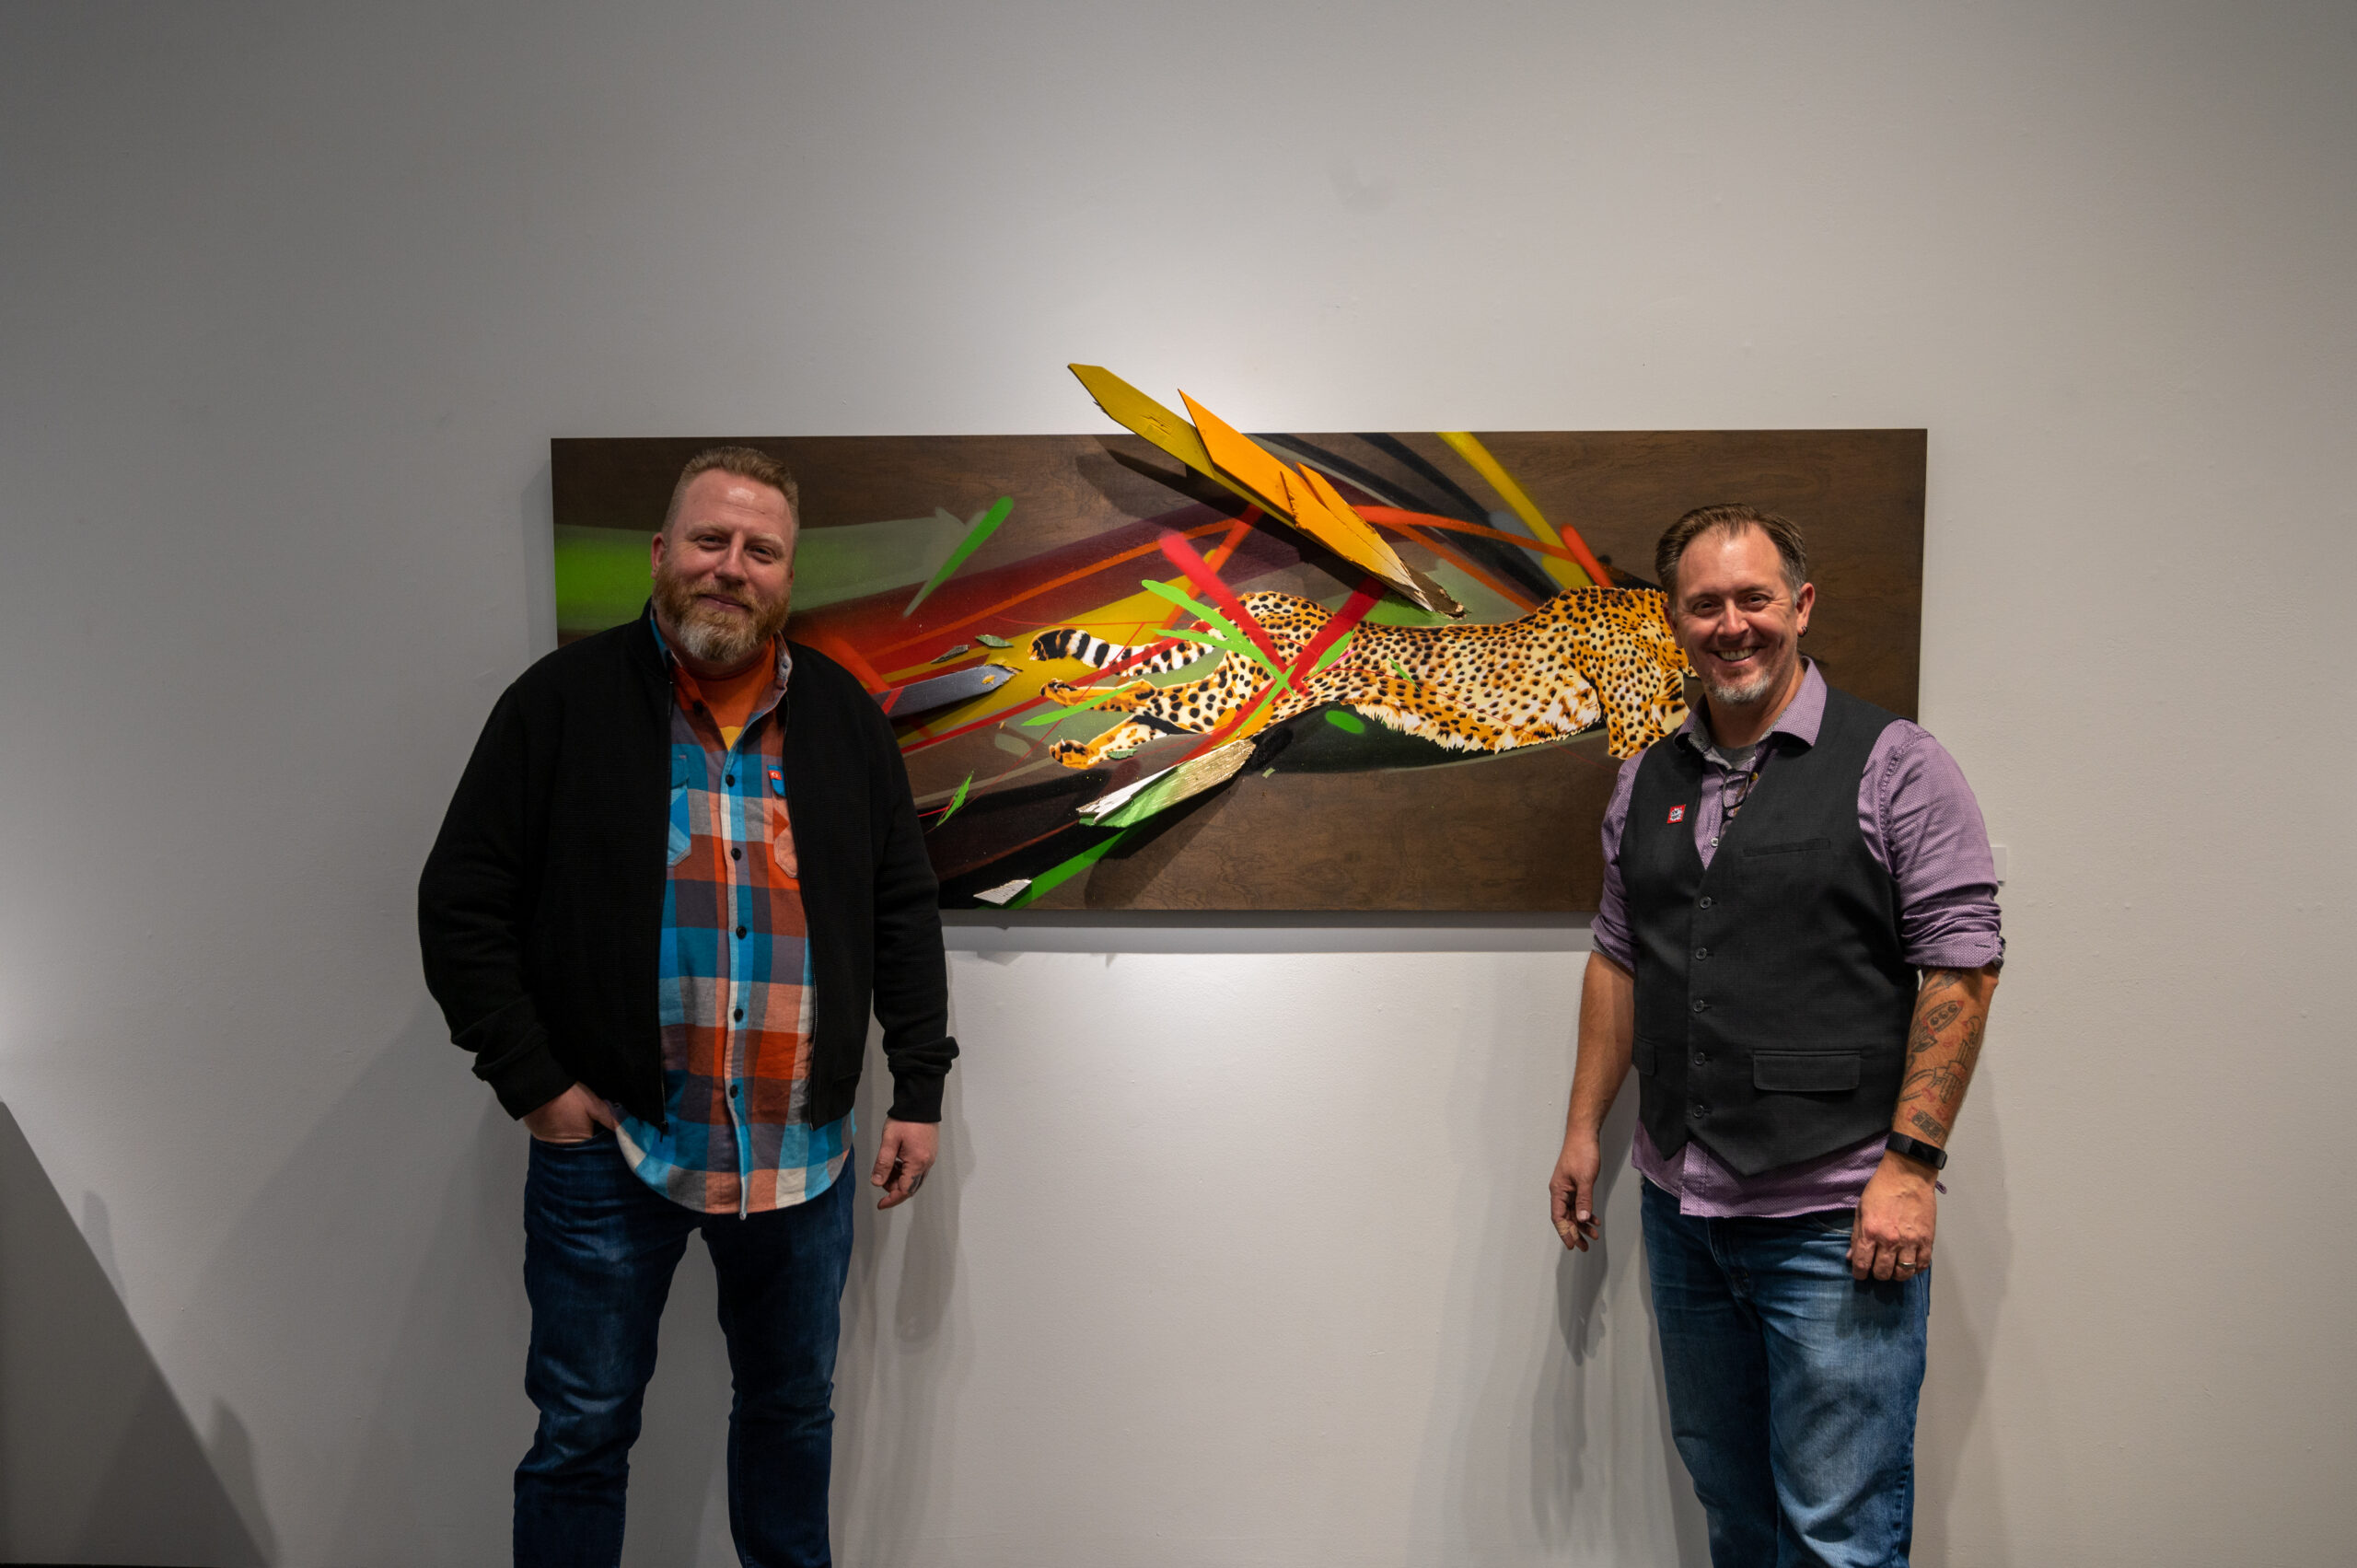 Photo of artists Bob Peck and Rich Cihlar in front of cheetah painting also known as Don't Panic!